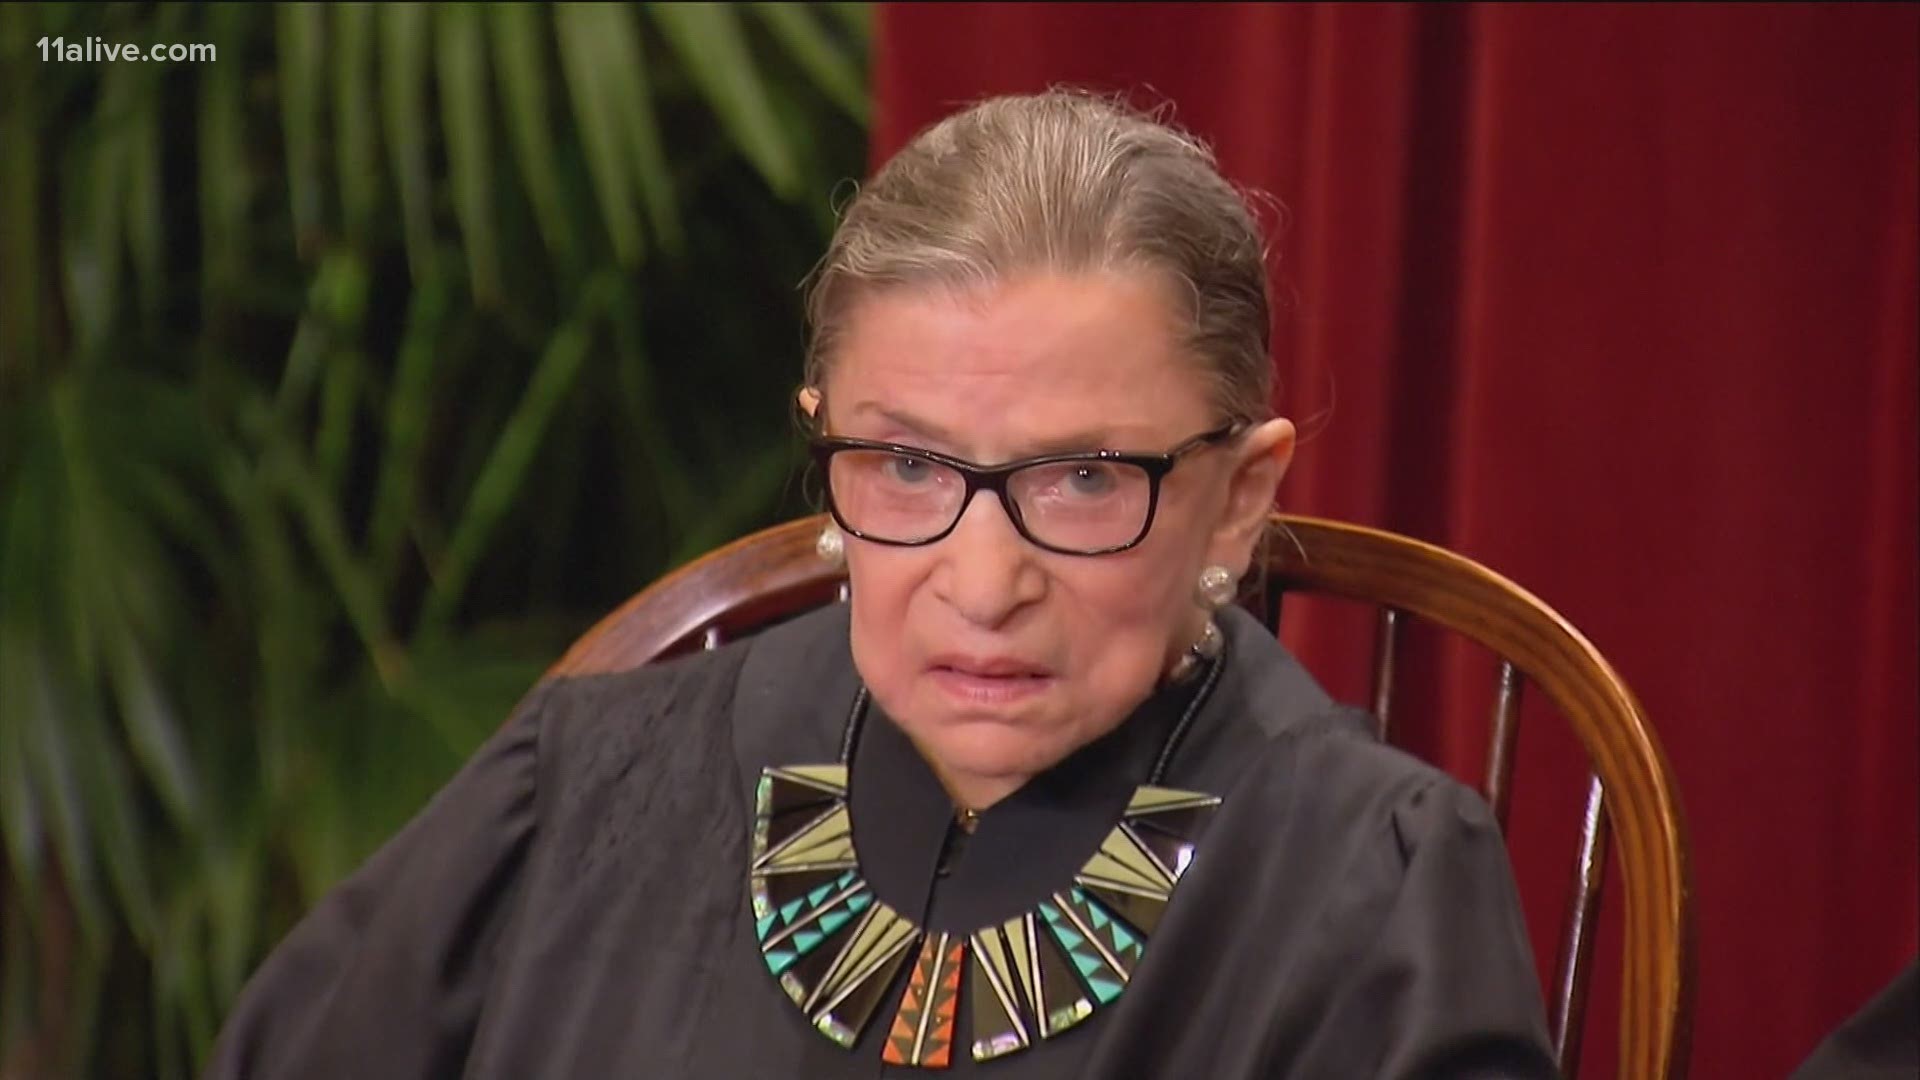 Appointed to the nation’s highest court in 1993 by former President Bill Clinton, Ginsburg was the oldest sitting member on the court.